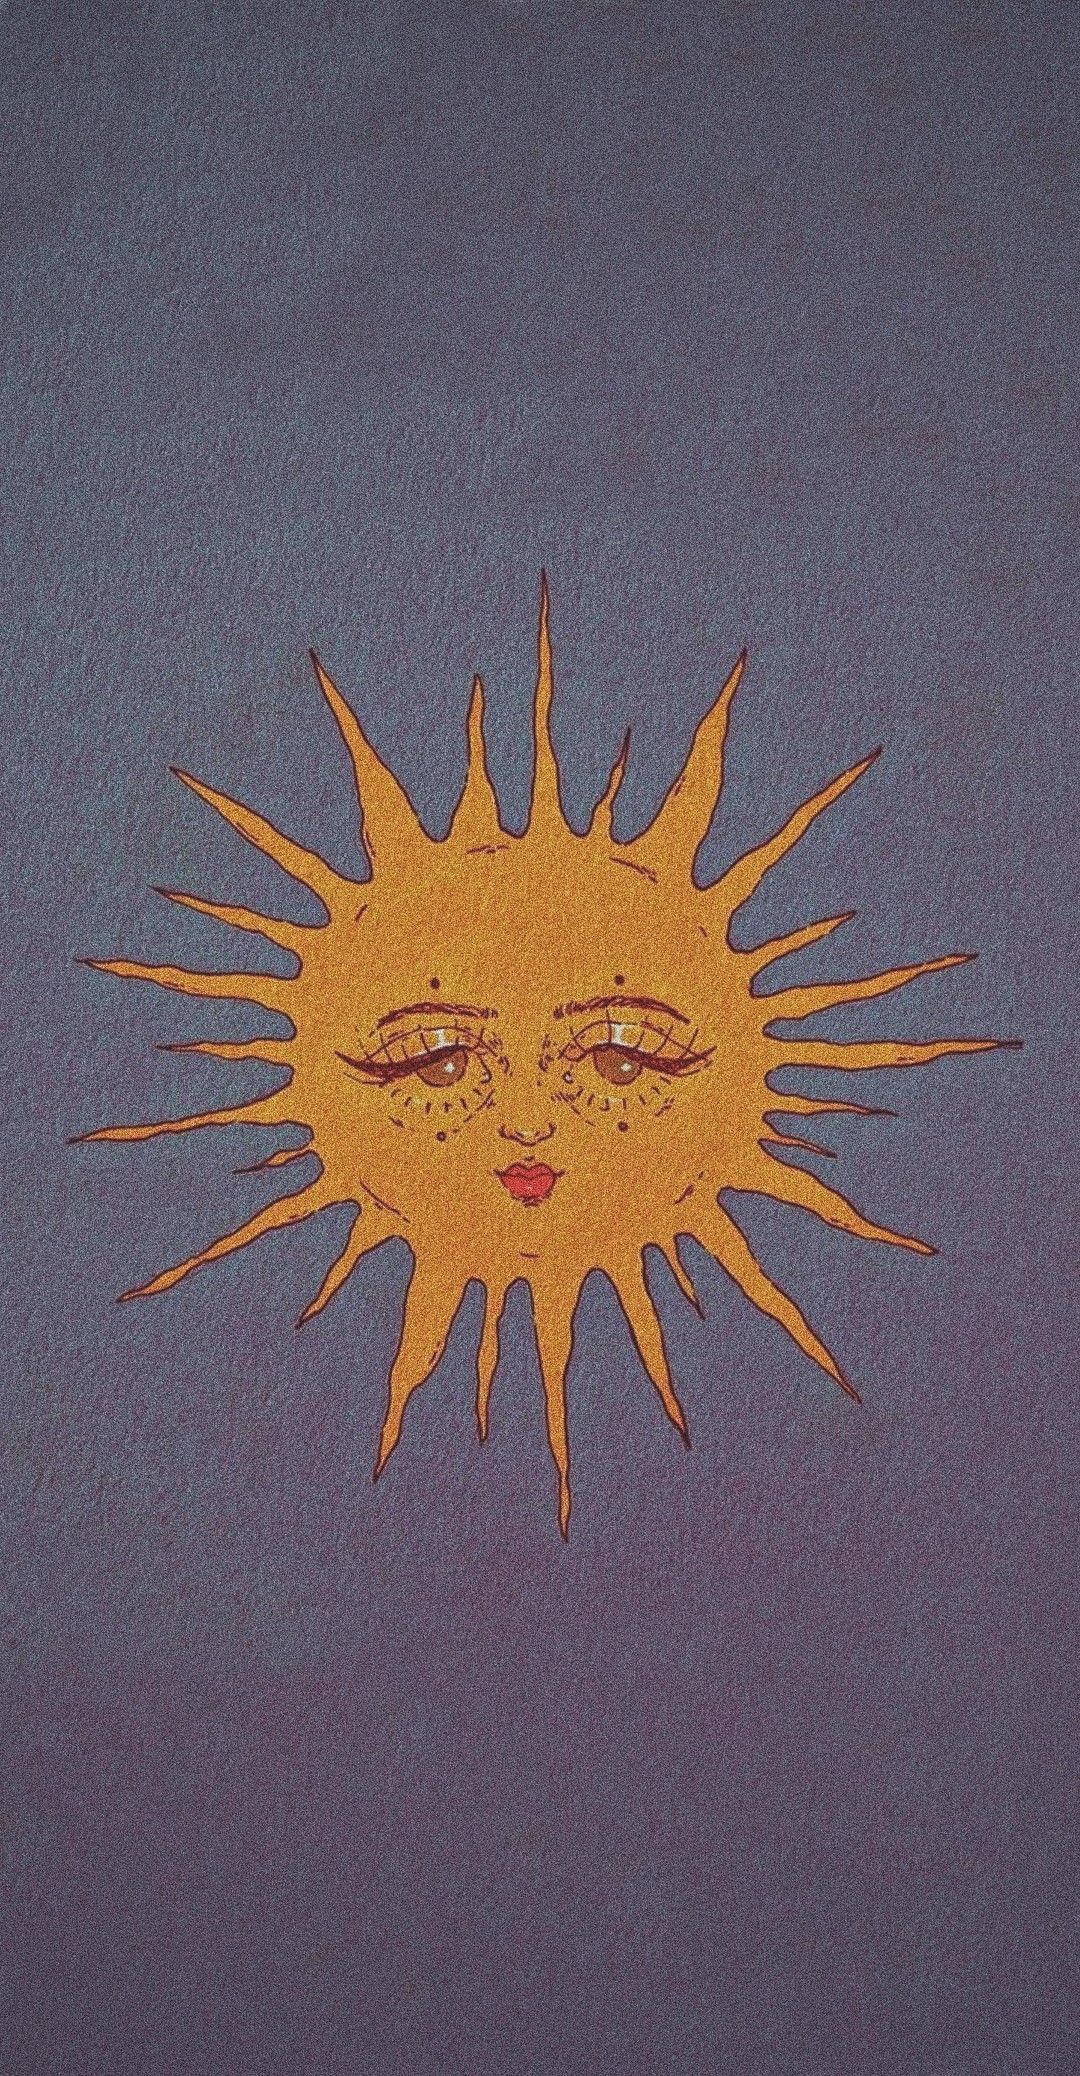 A yellow sun with a face on a purple background - Sun, sunlight